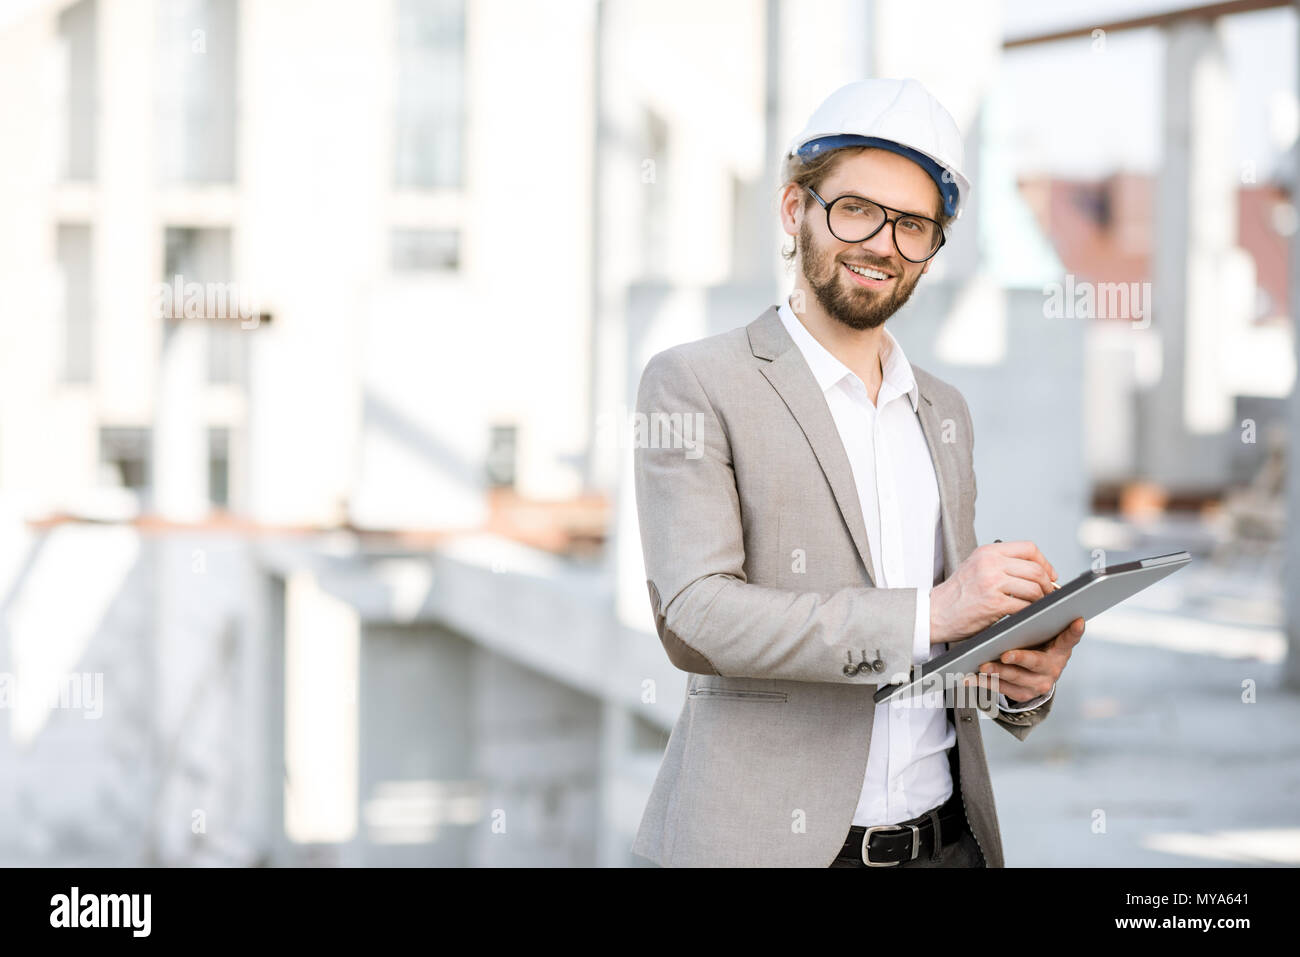 Engineer with tablet on the structure Stock Photo